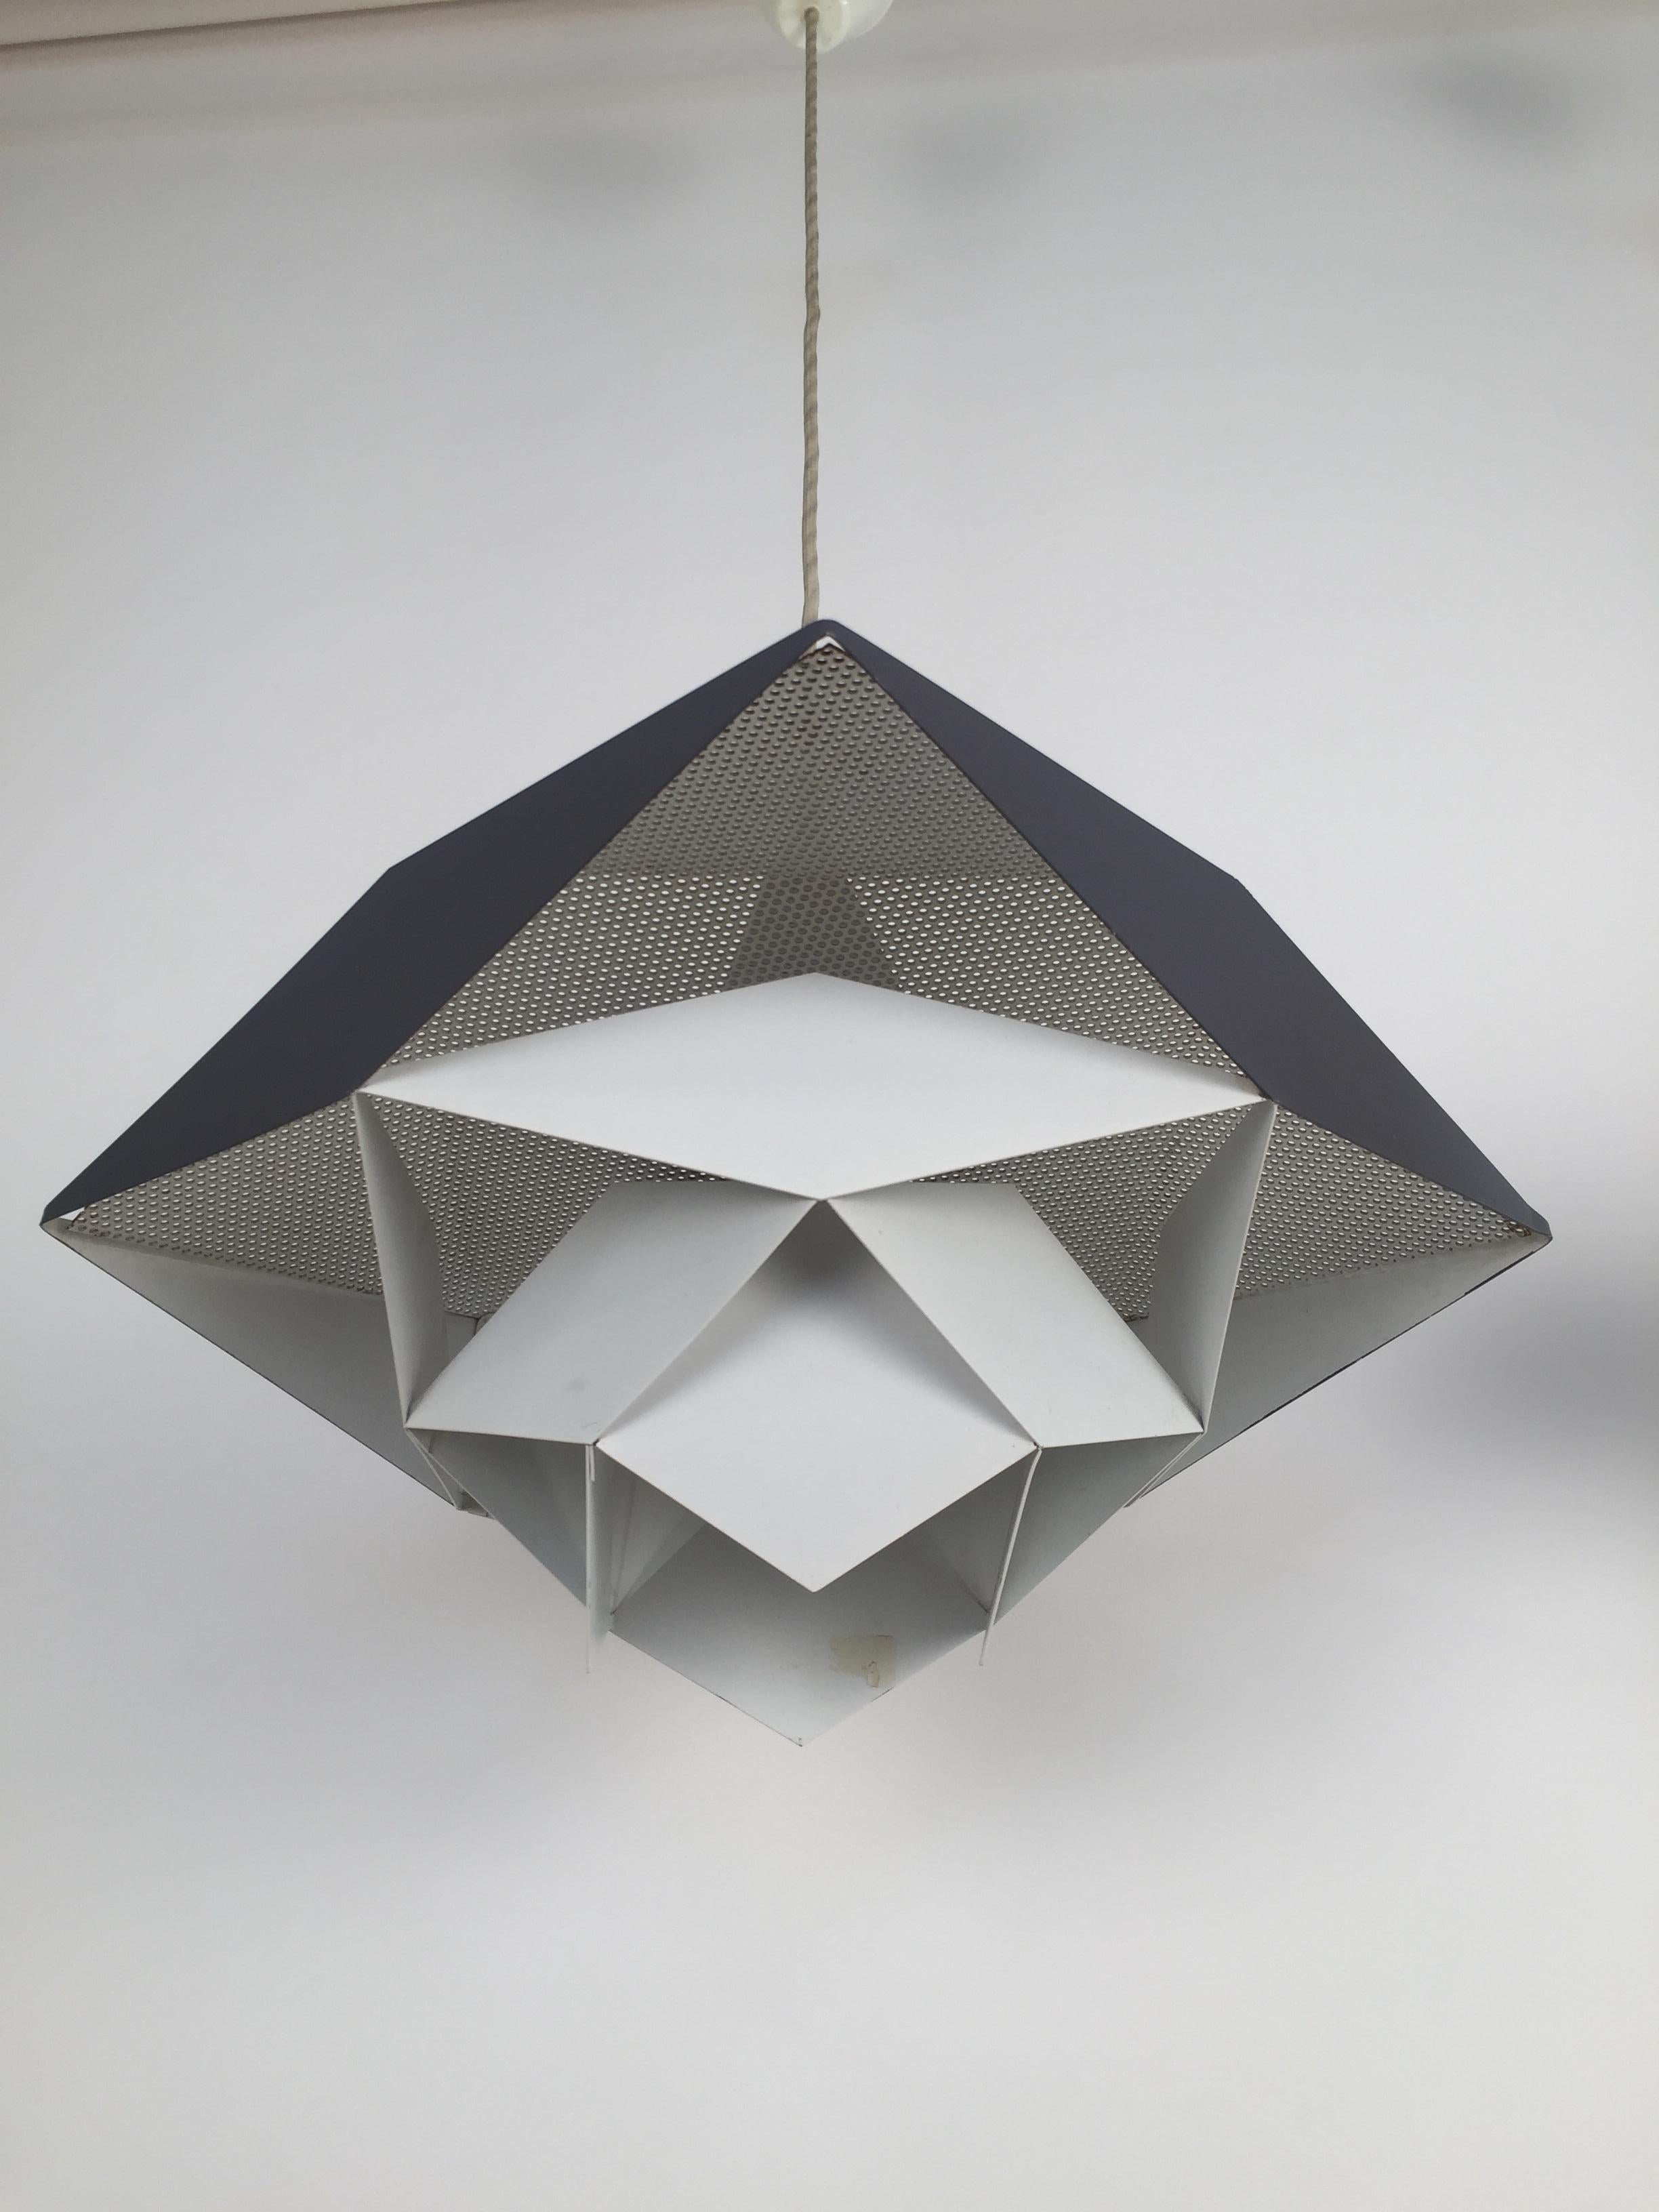 Mid-20th Century Preben Dahl Pair of Ceiling Lamps Model “Sinfoni” by Hans Folsgaard, 1960 For Sale